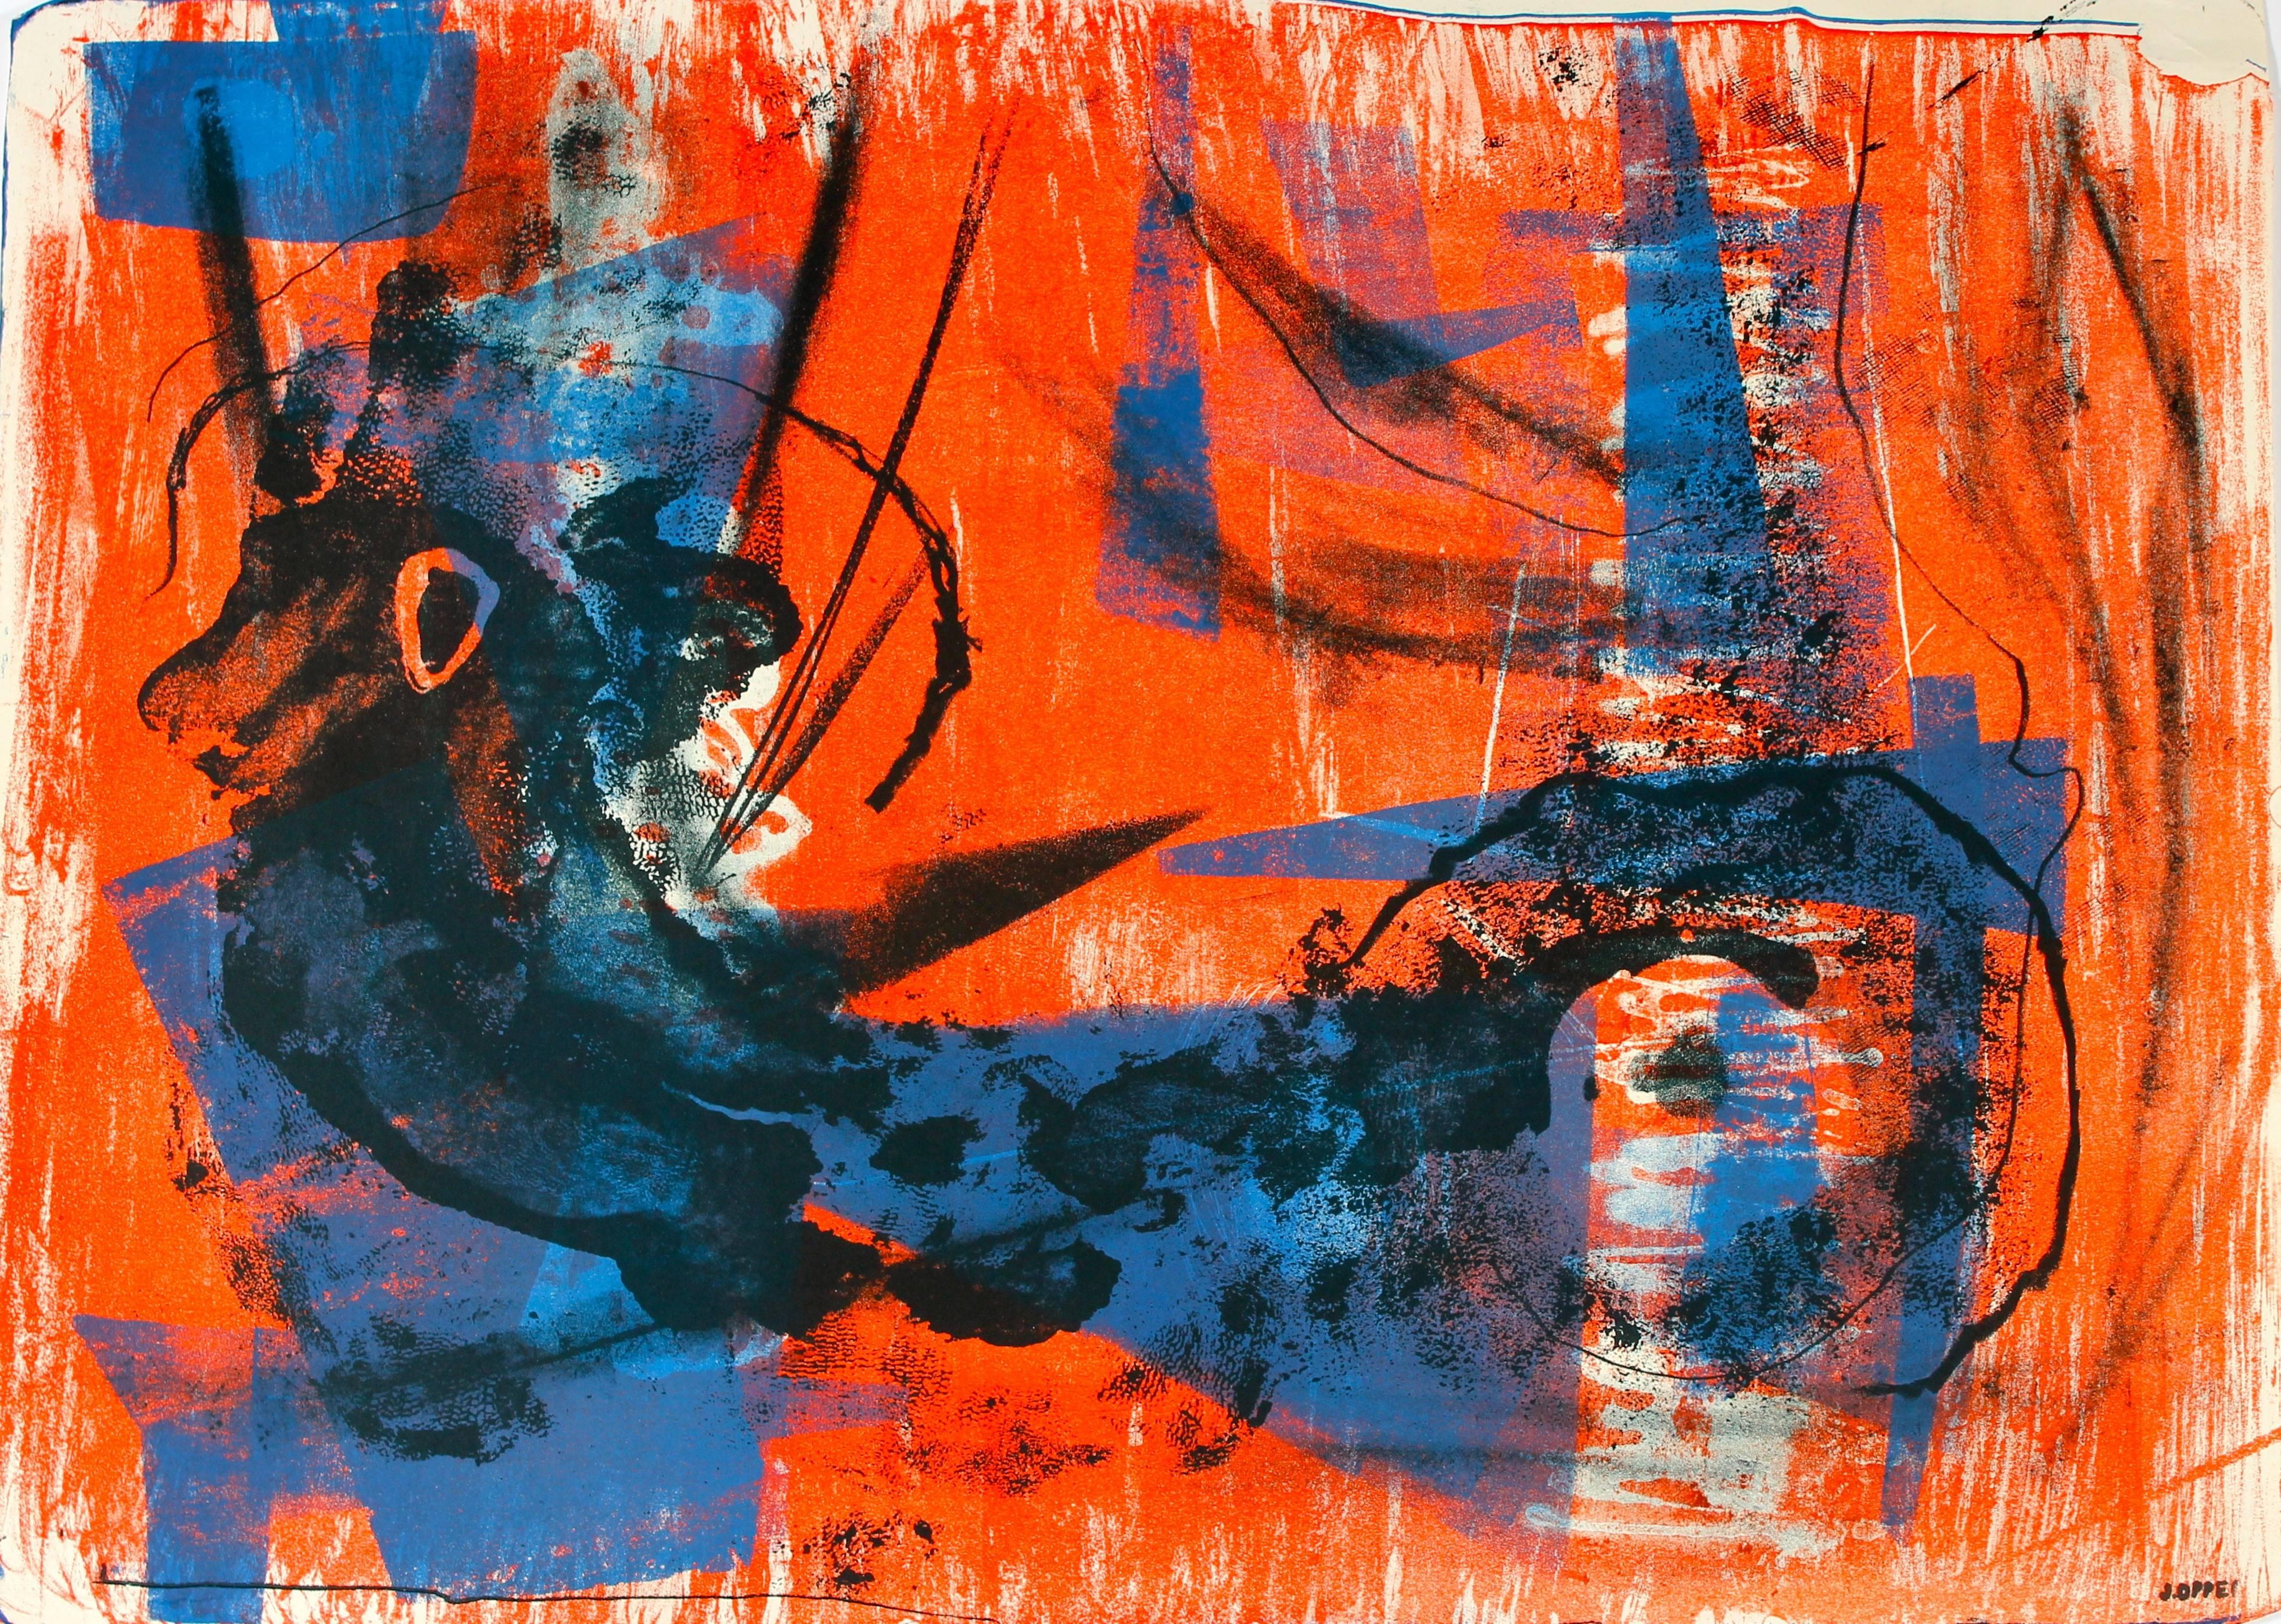 Jerry Opper Abstract Print - Abstract Expressionist Lithograph in Bright Blue and Orange, Circa 1950s